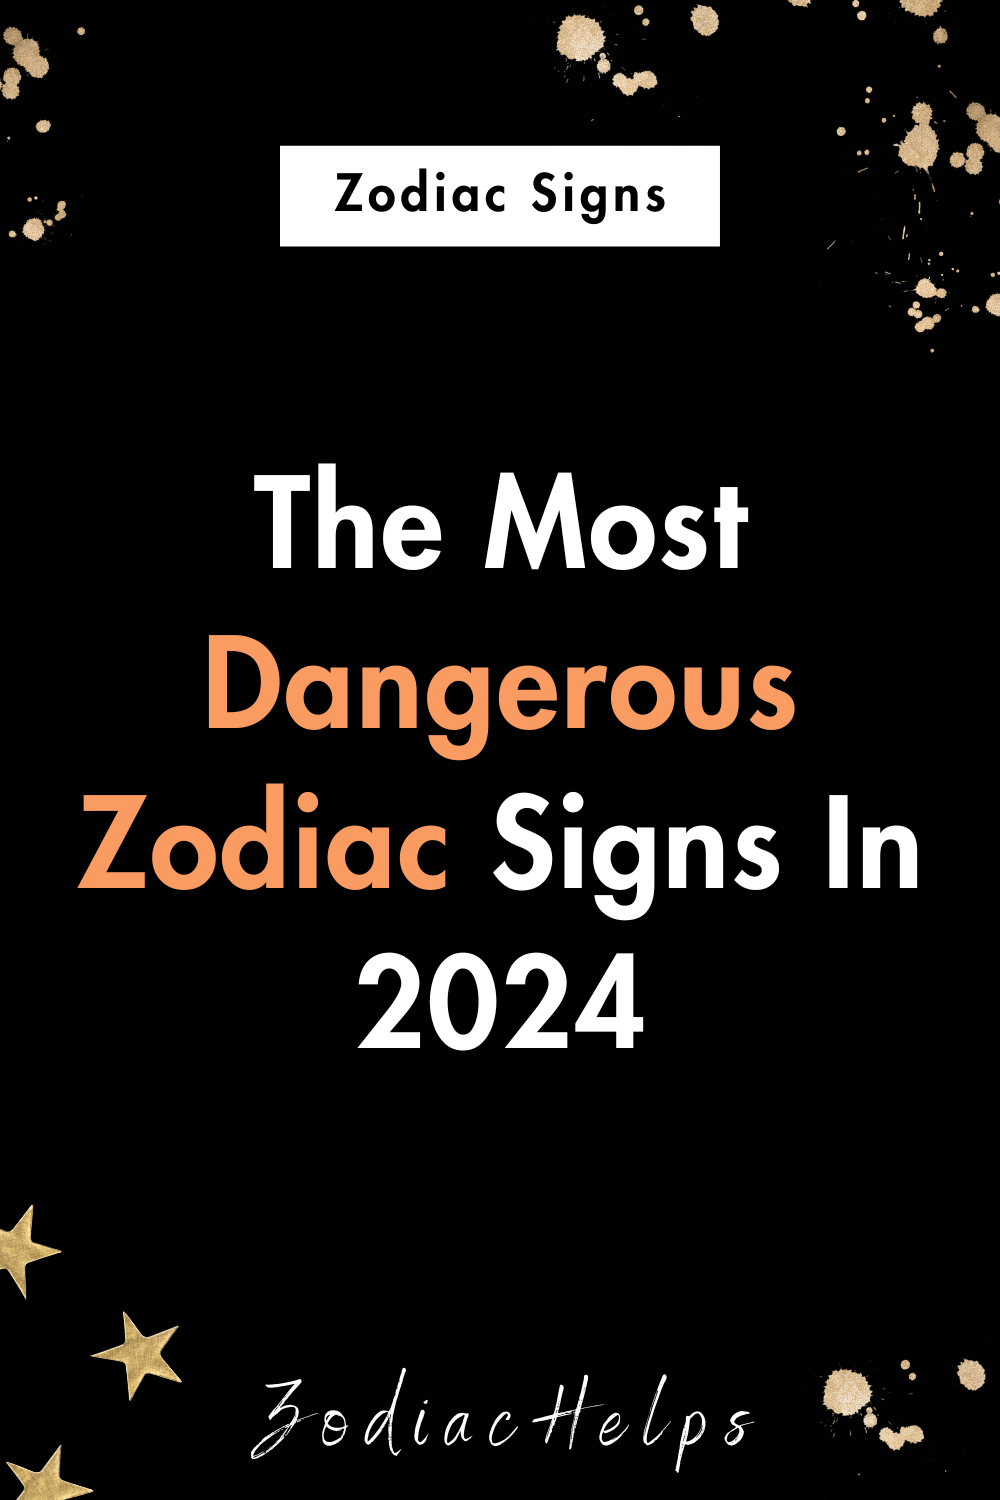 The Most Dangerous Zodiac Signs In 2024